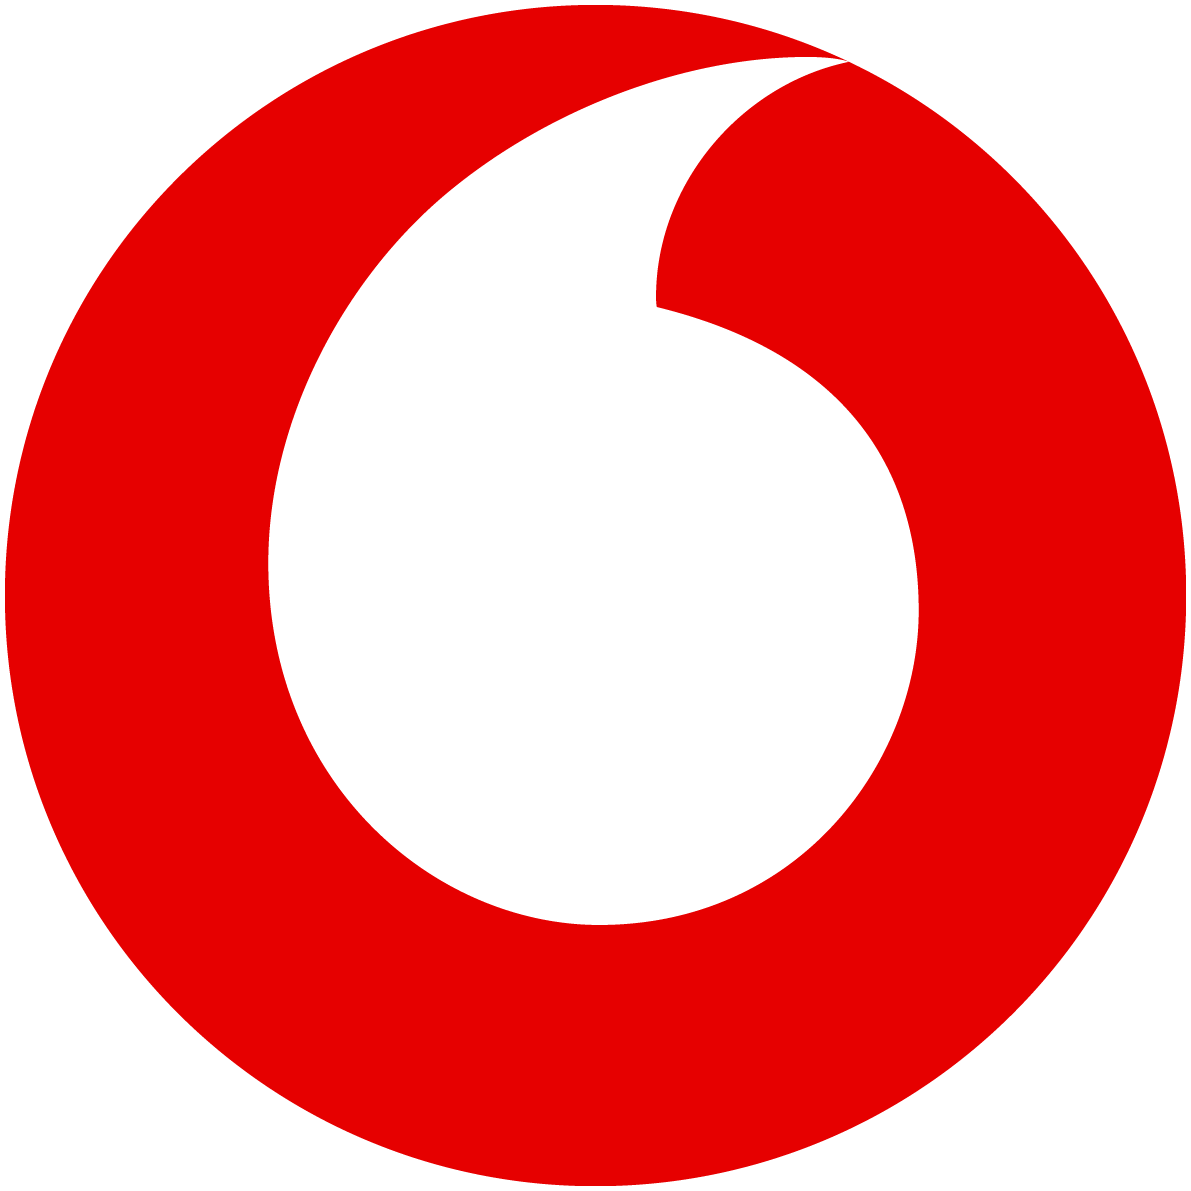 How to check your own number in Vodafone Australia